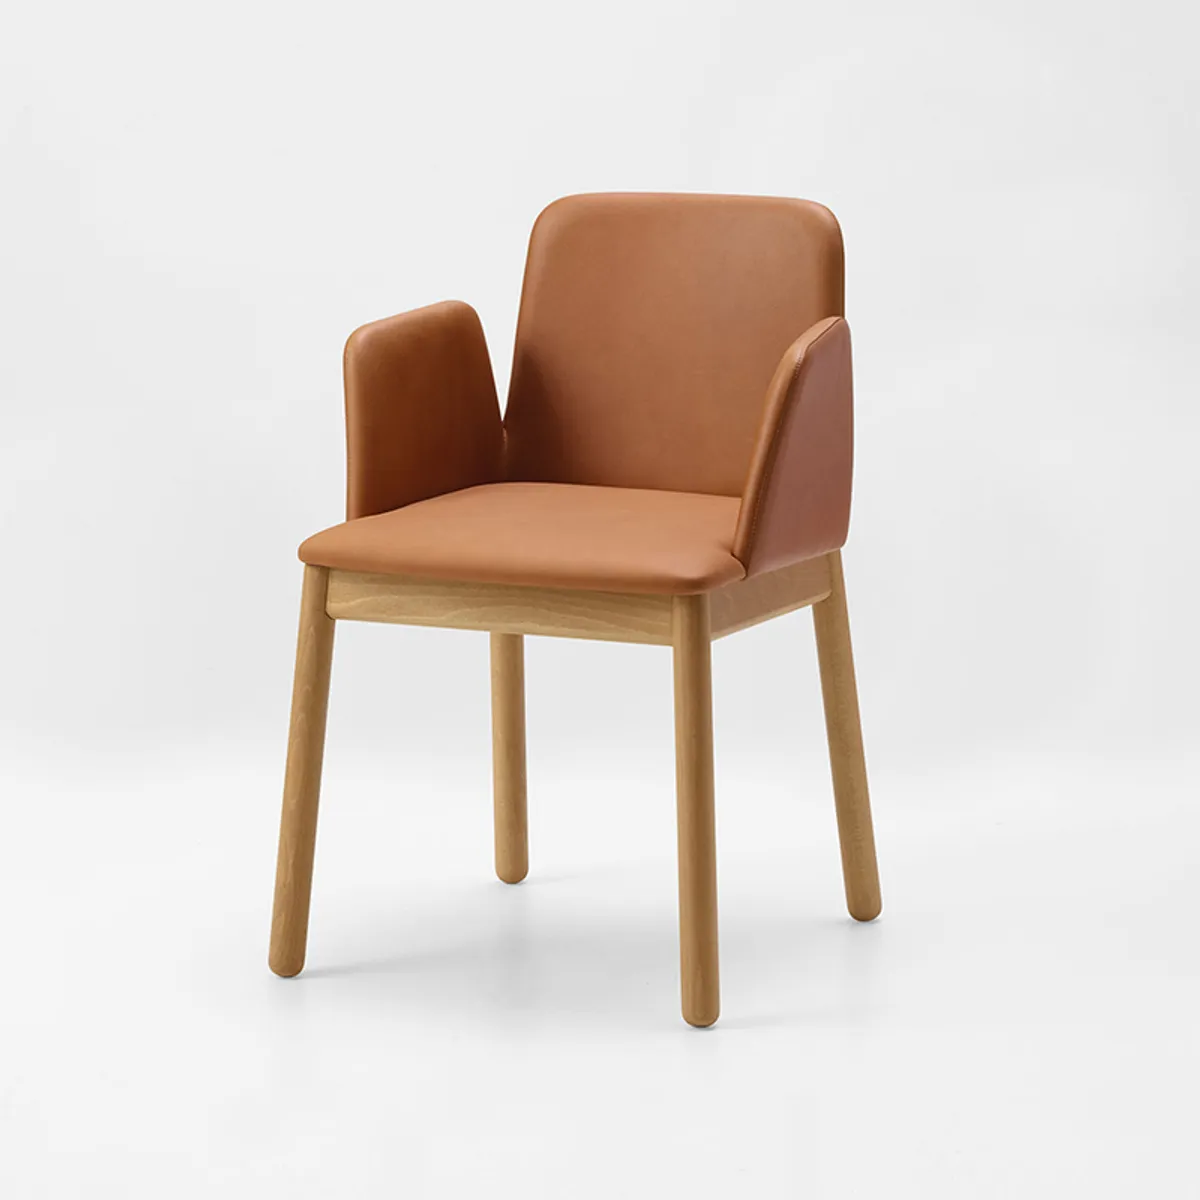 Norma Armchair 2 03 0 Inside Out Contracts